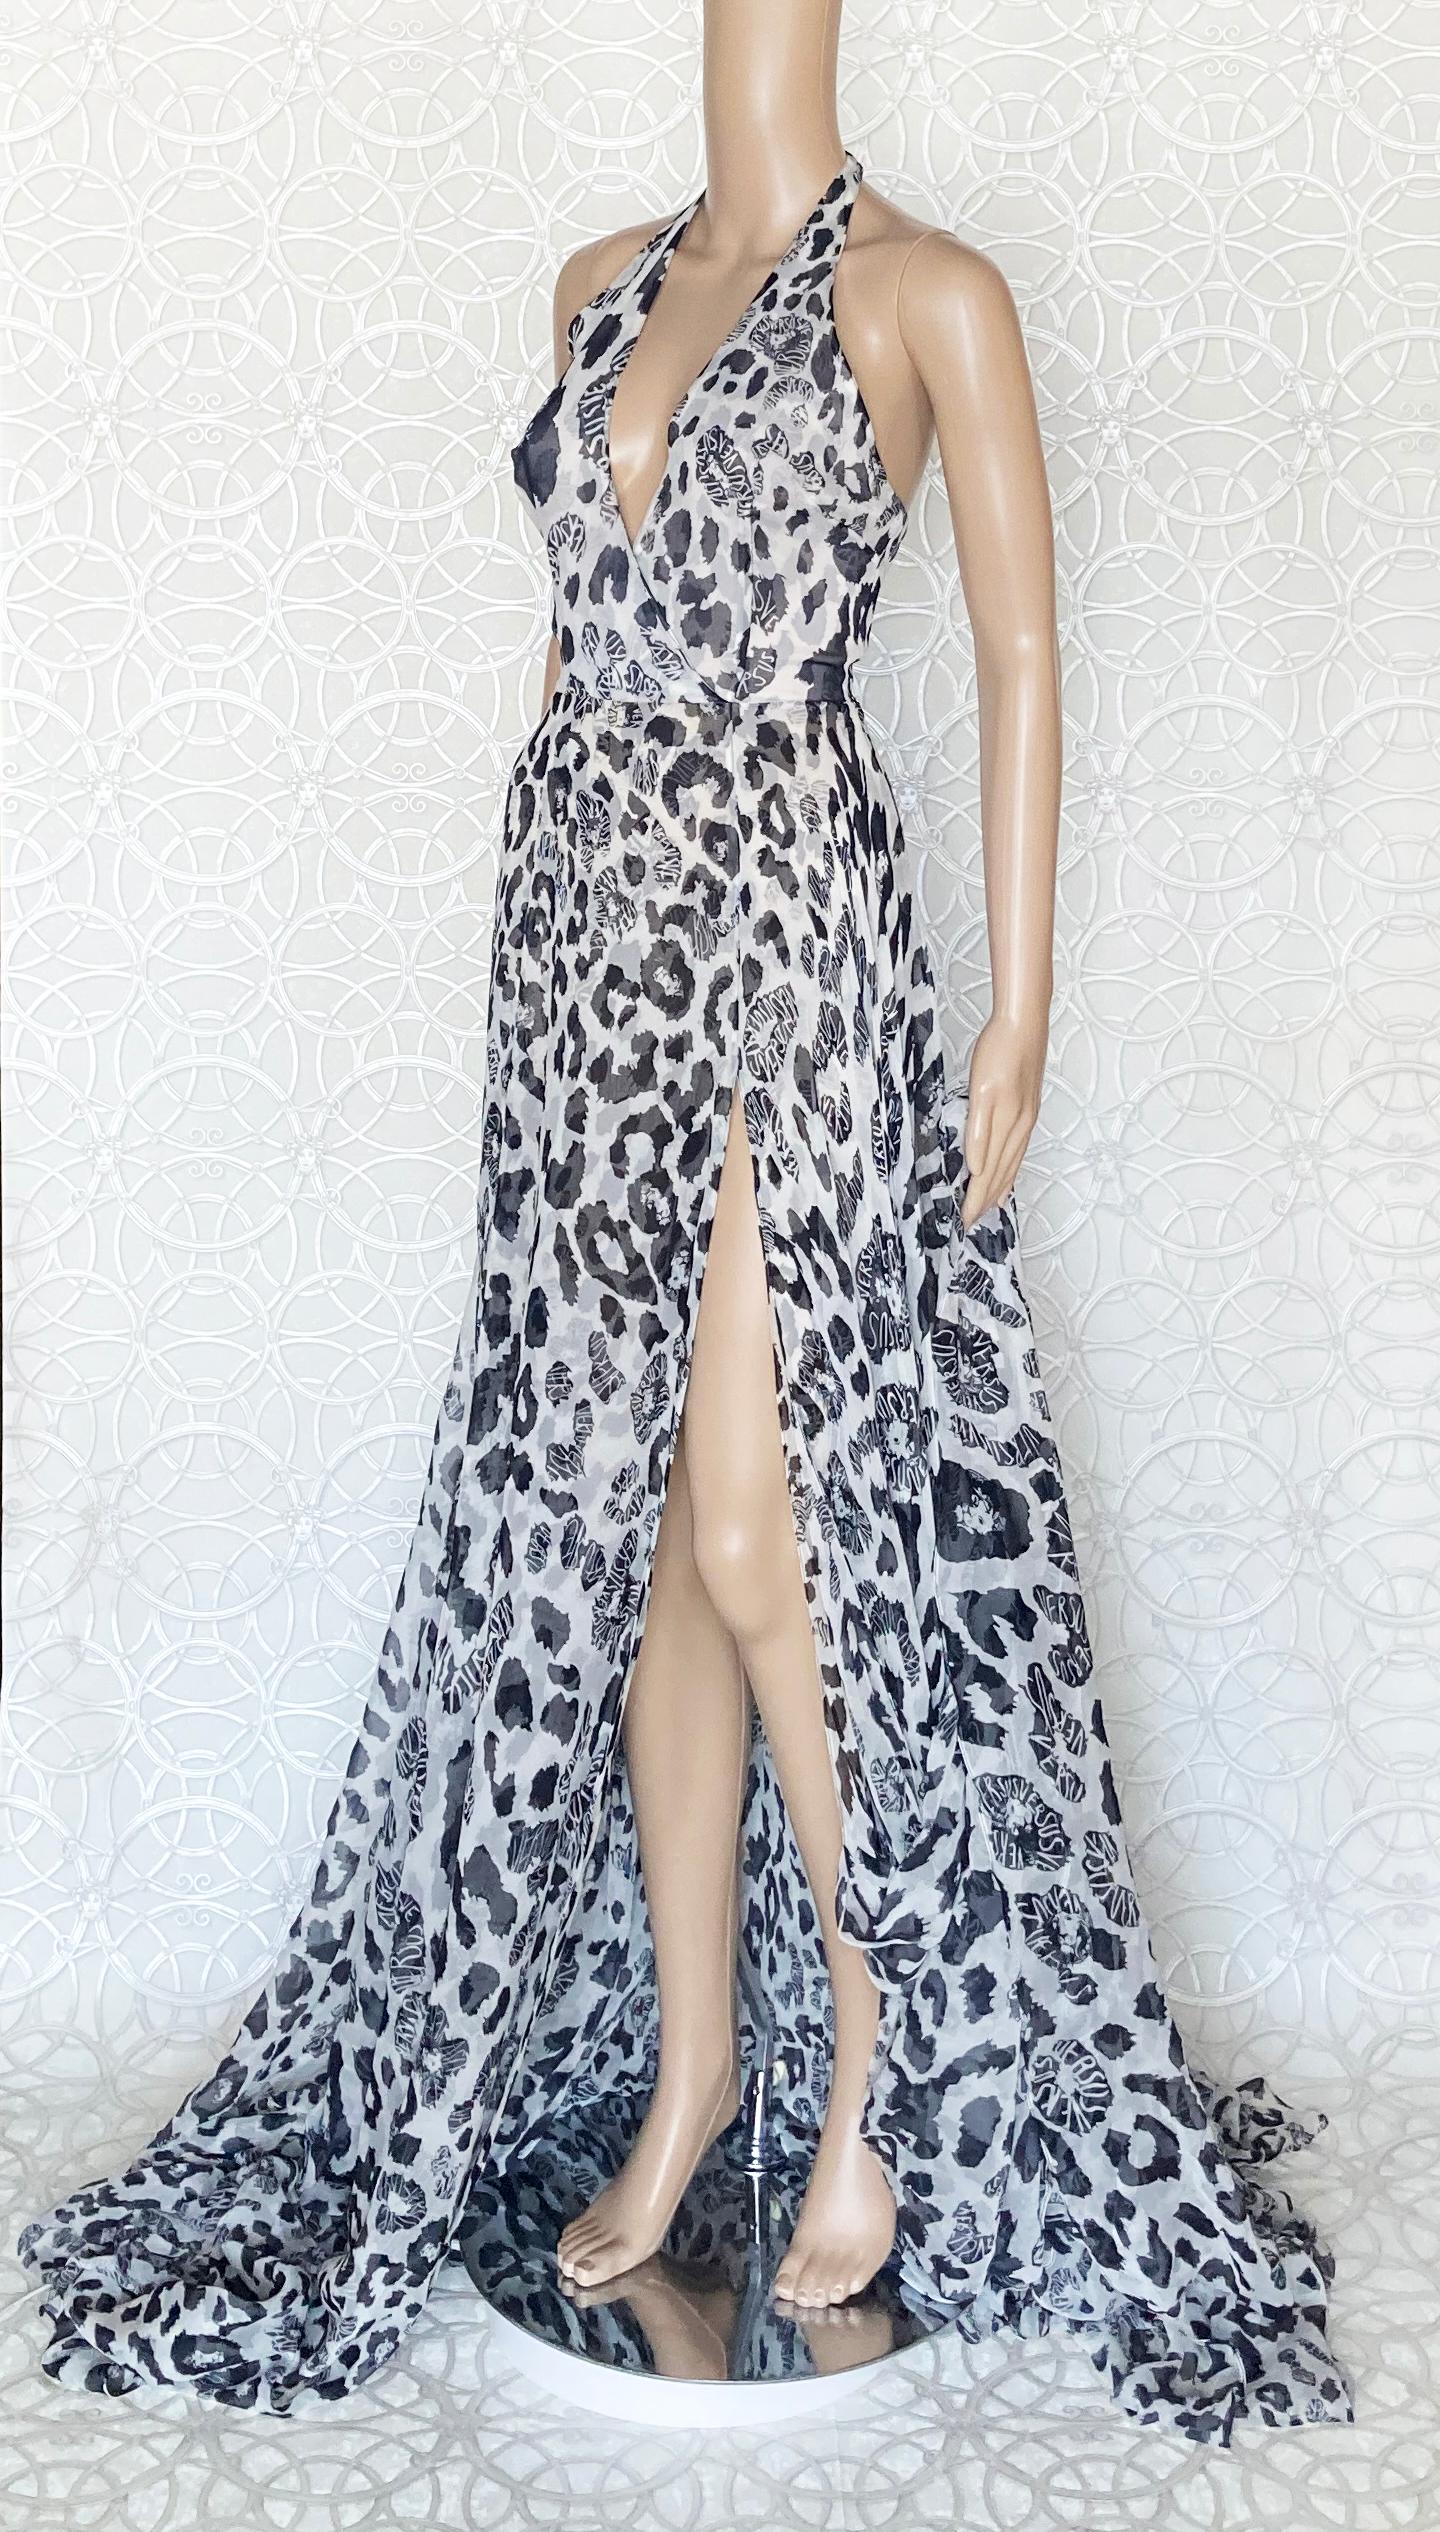 S/S 2016 VERSUS VERSACE LEOPARD Long DRESS 38 - 2 In New Condition For Sale In Montgomery, TX